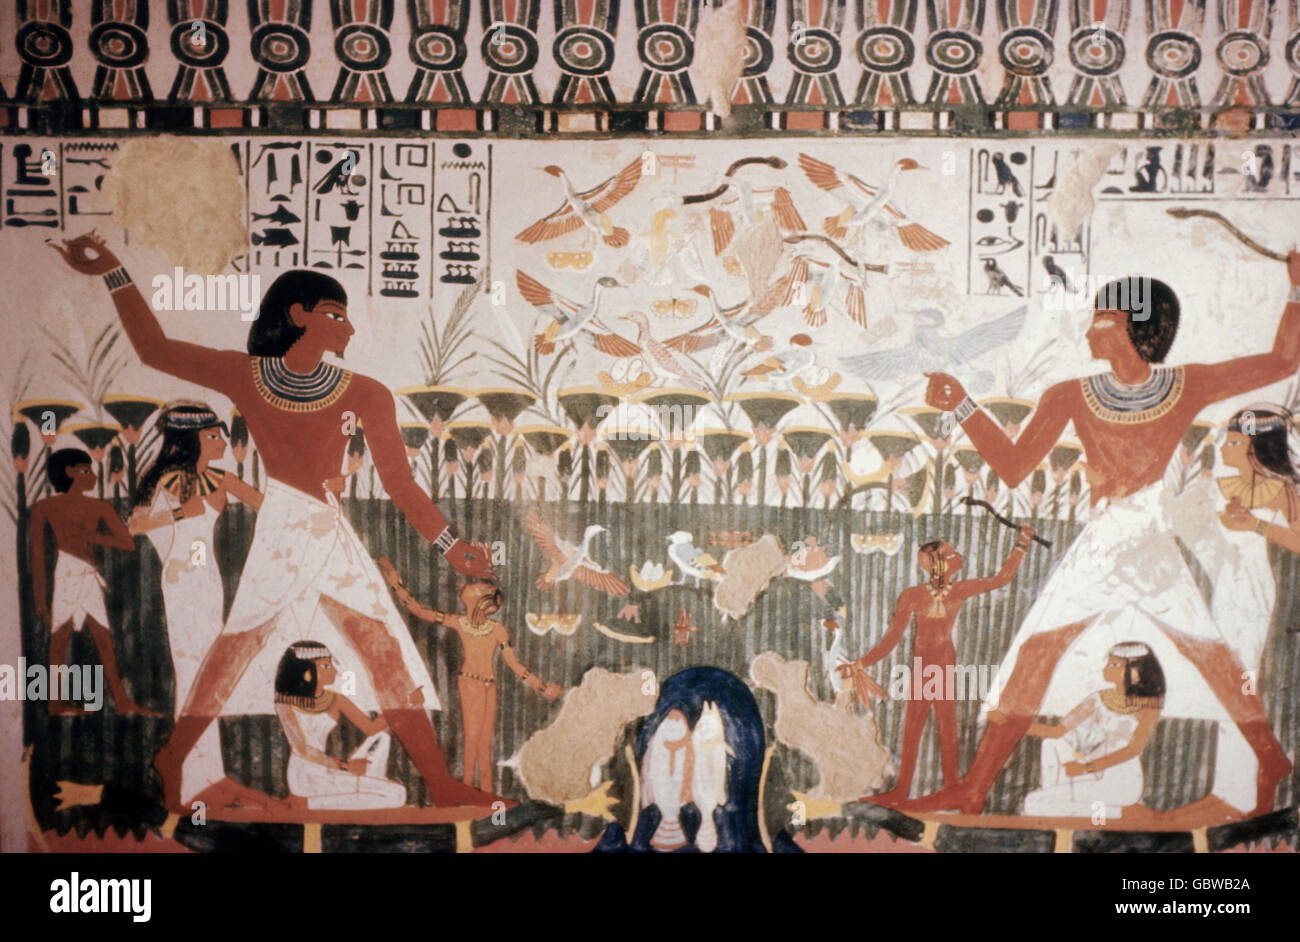 geography / travel,Egypt,hunt,fowling with throwing stick,mural painting,grave of the noble,Thebes west,18th Dynasty,family,families,children,child,kids,kid,nobility,aristocracy,aristocracies,hunter,hunters,papyrus,papyros,ancient world,ancient times,grave,graves,Dynasty,dynasties,North Africa,Northern Africa,Africa,mural painting,wall painting,murals,mural paintings,wall paintings,wallpainting,wallpaintings,art of painting,fine arts,art,tomb,tombs,burial place,burial ground,burial site,resting place,hunt,hunts,an,Additional-Rights-Clearences-Not Available Stock Photo